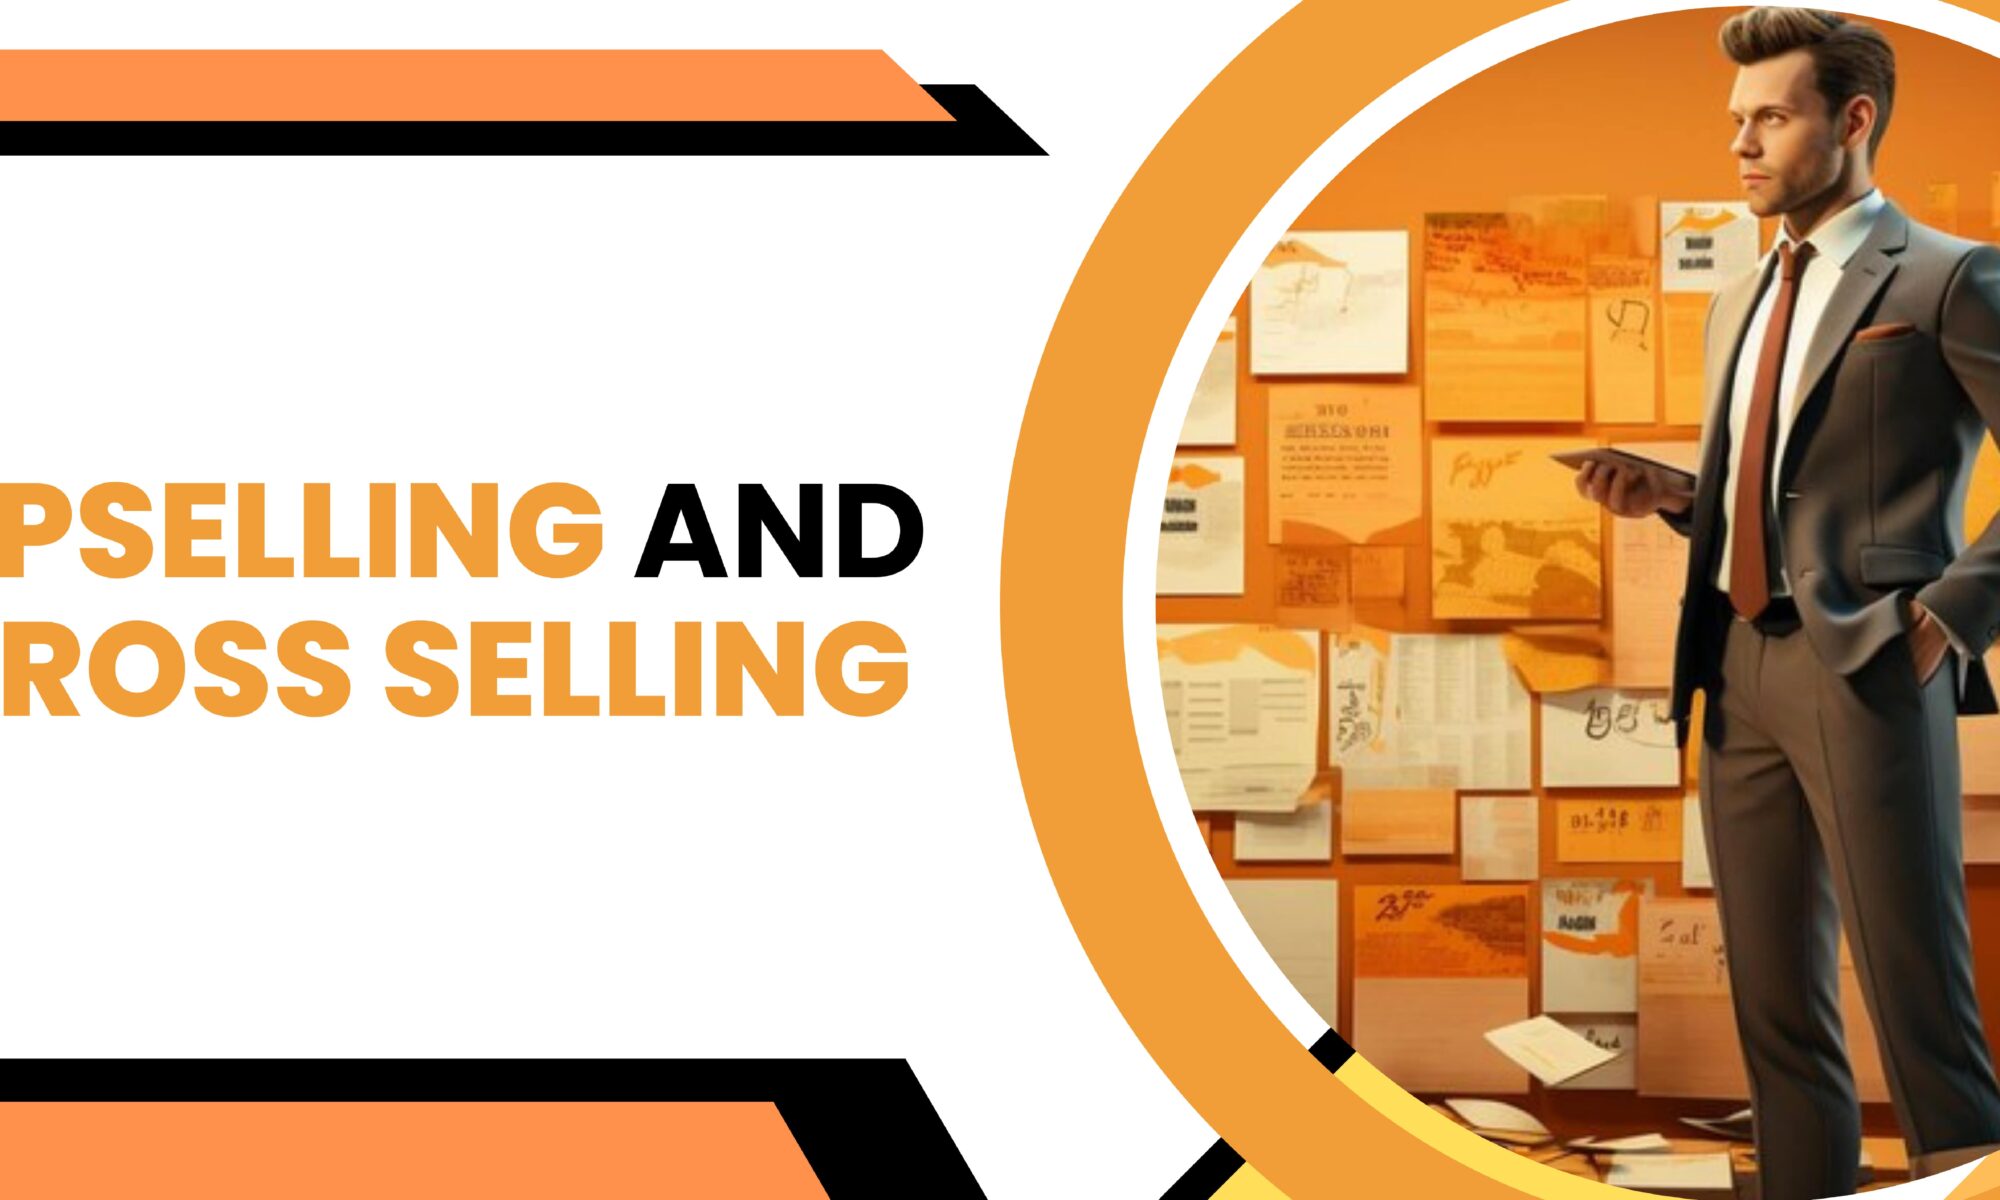 Upselling And Cross Selling